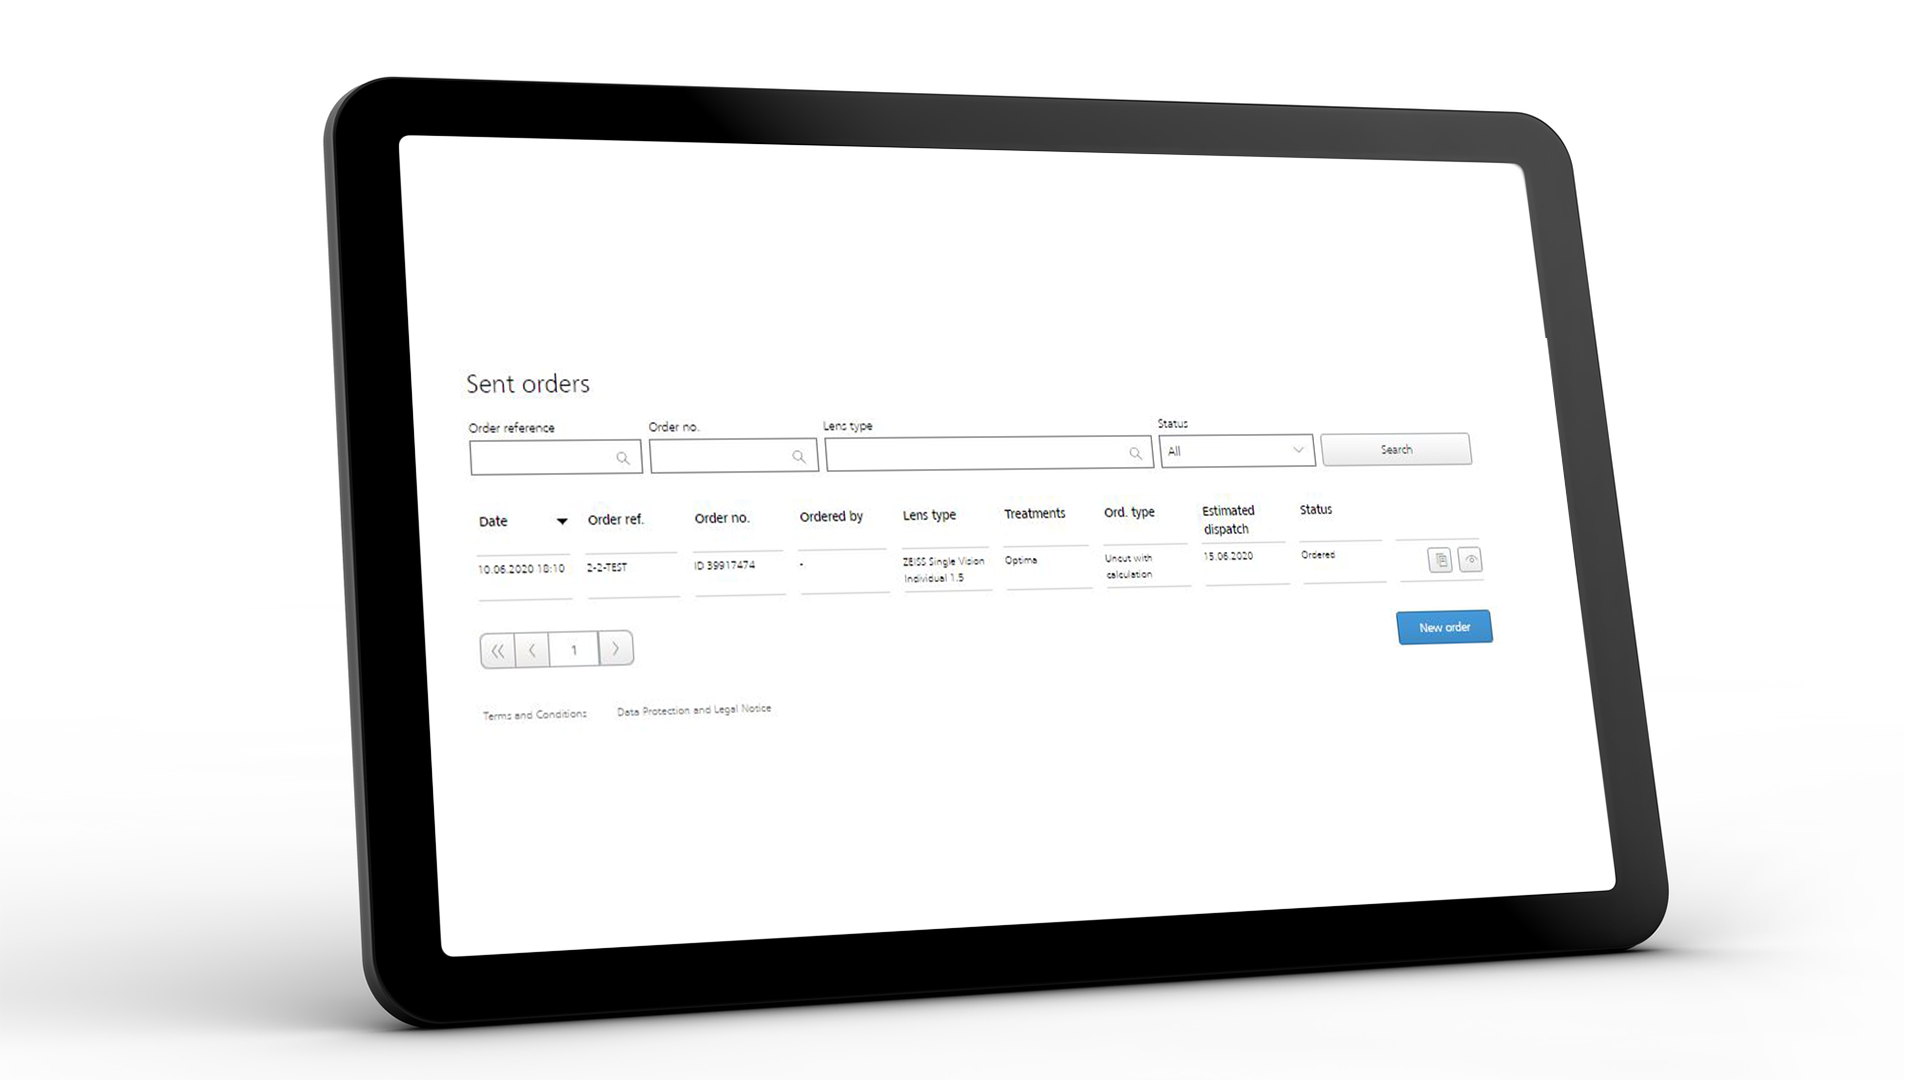 Tablet screen showing the ZEISS VISUSTORE interface for sent orders 